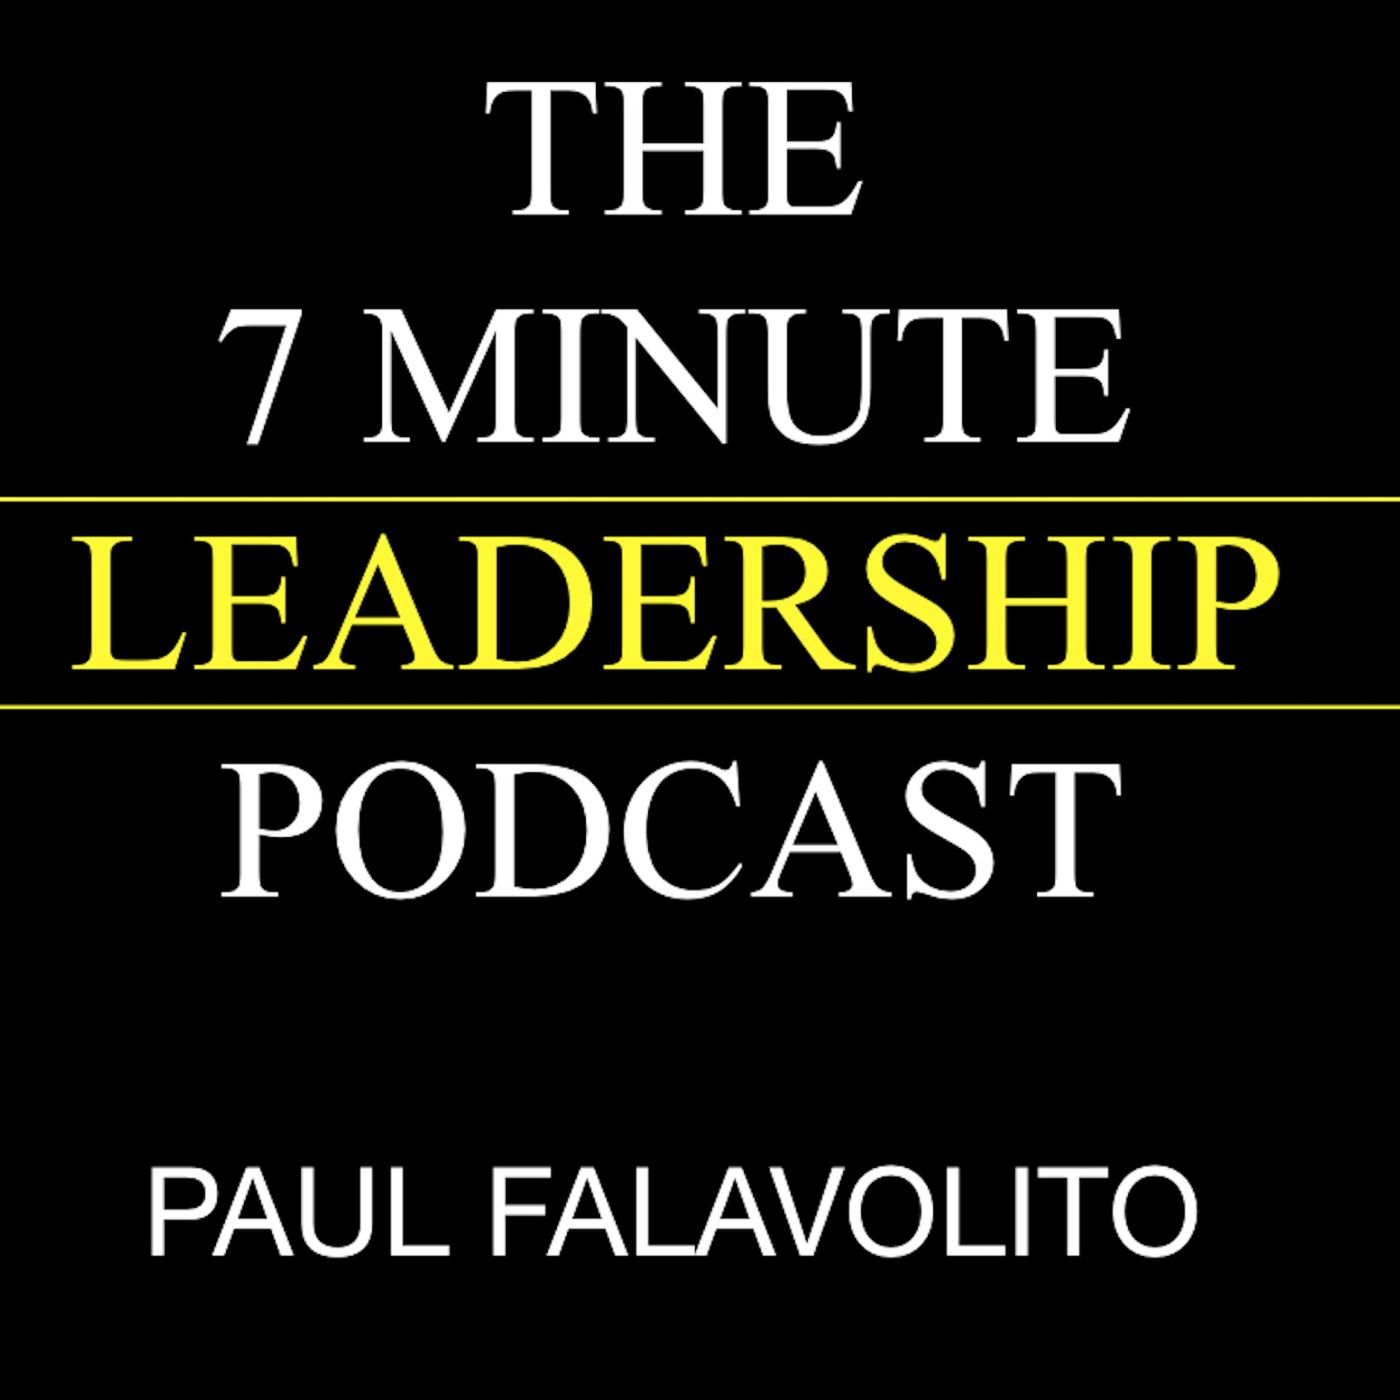 Episode 33 - Low morale and poor work performance in the workplace.